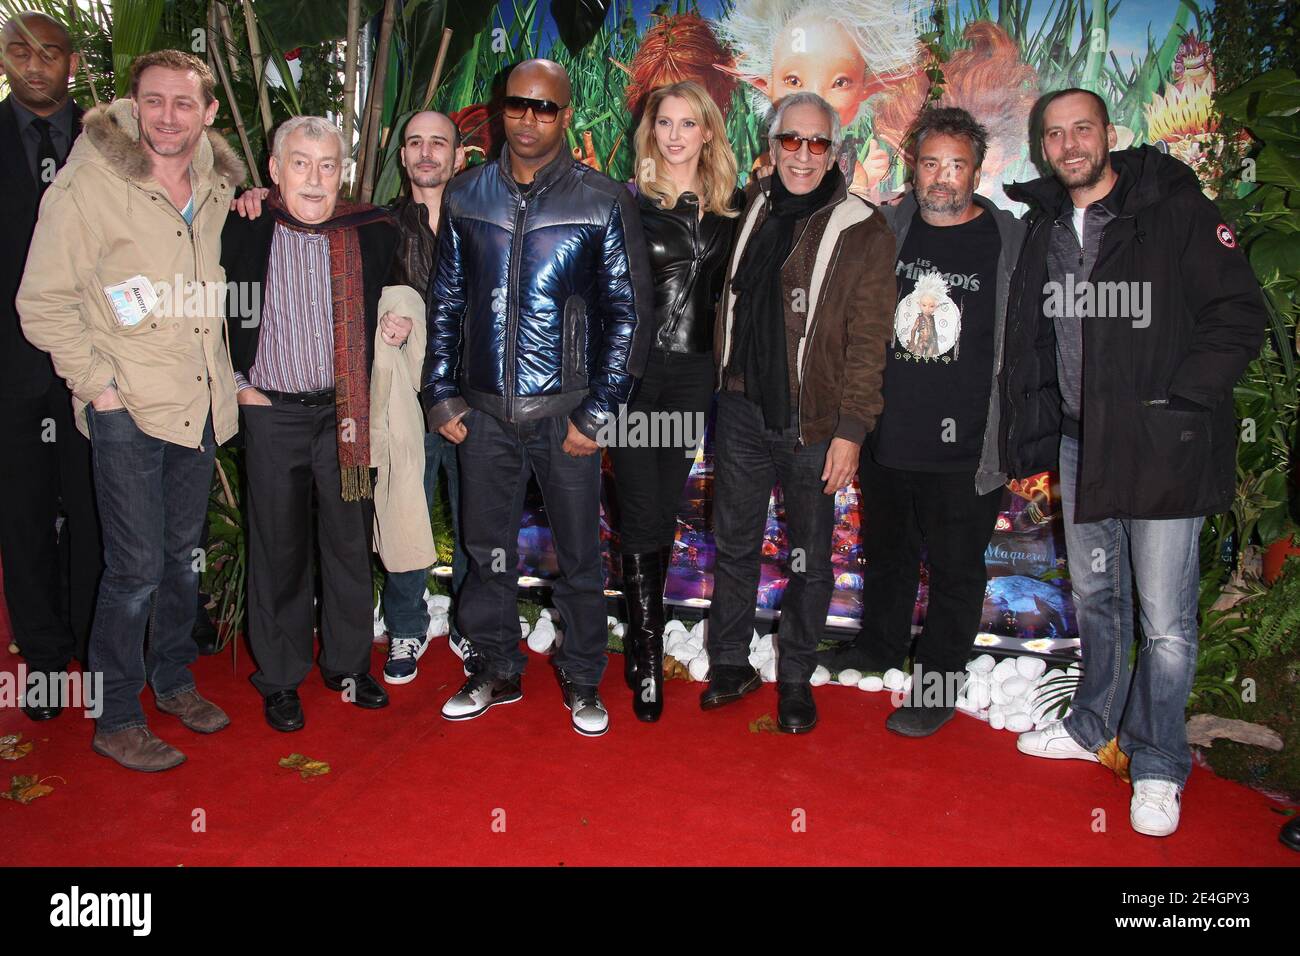 Cast members (L toR) Jean-Paul Rouve, Michel Duchaussoy, Frederique Bel, Gerard Darmon, French Producer and Director Luc Besson and Fred Testo arriving to the premiere of 'Arthur et la Vengeance de Maltazard' at Gaumont Marignan theater in Paris, France on November 22, 2009. Photo by Denis Guignebourg/ABACAPRESS.COM Stock Photo